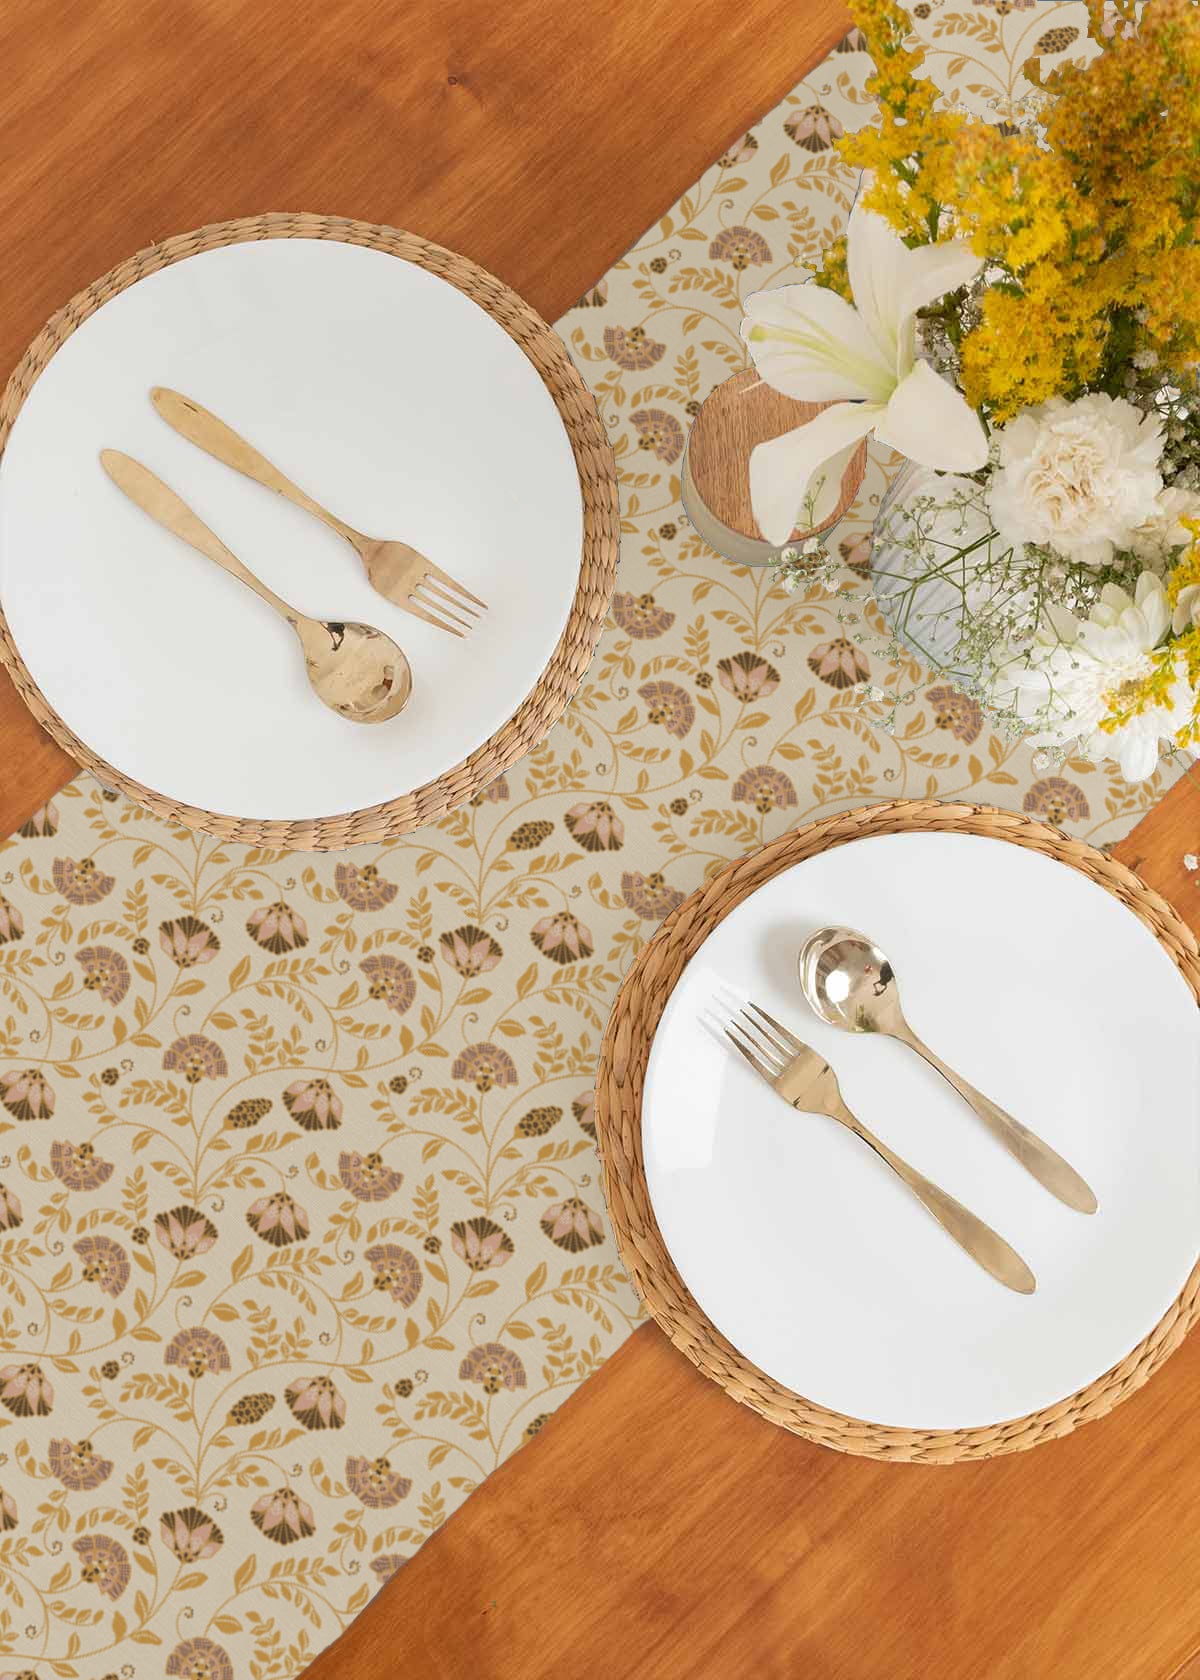 Calico Printed Cotton Table Runner